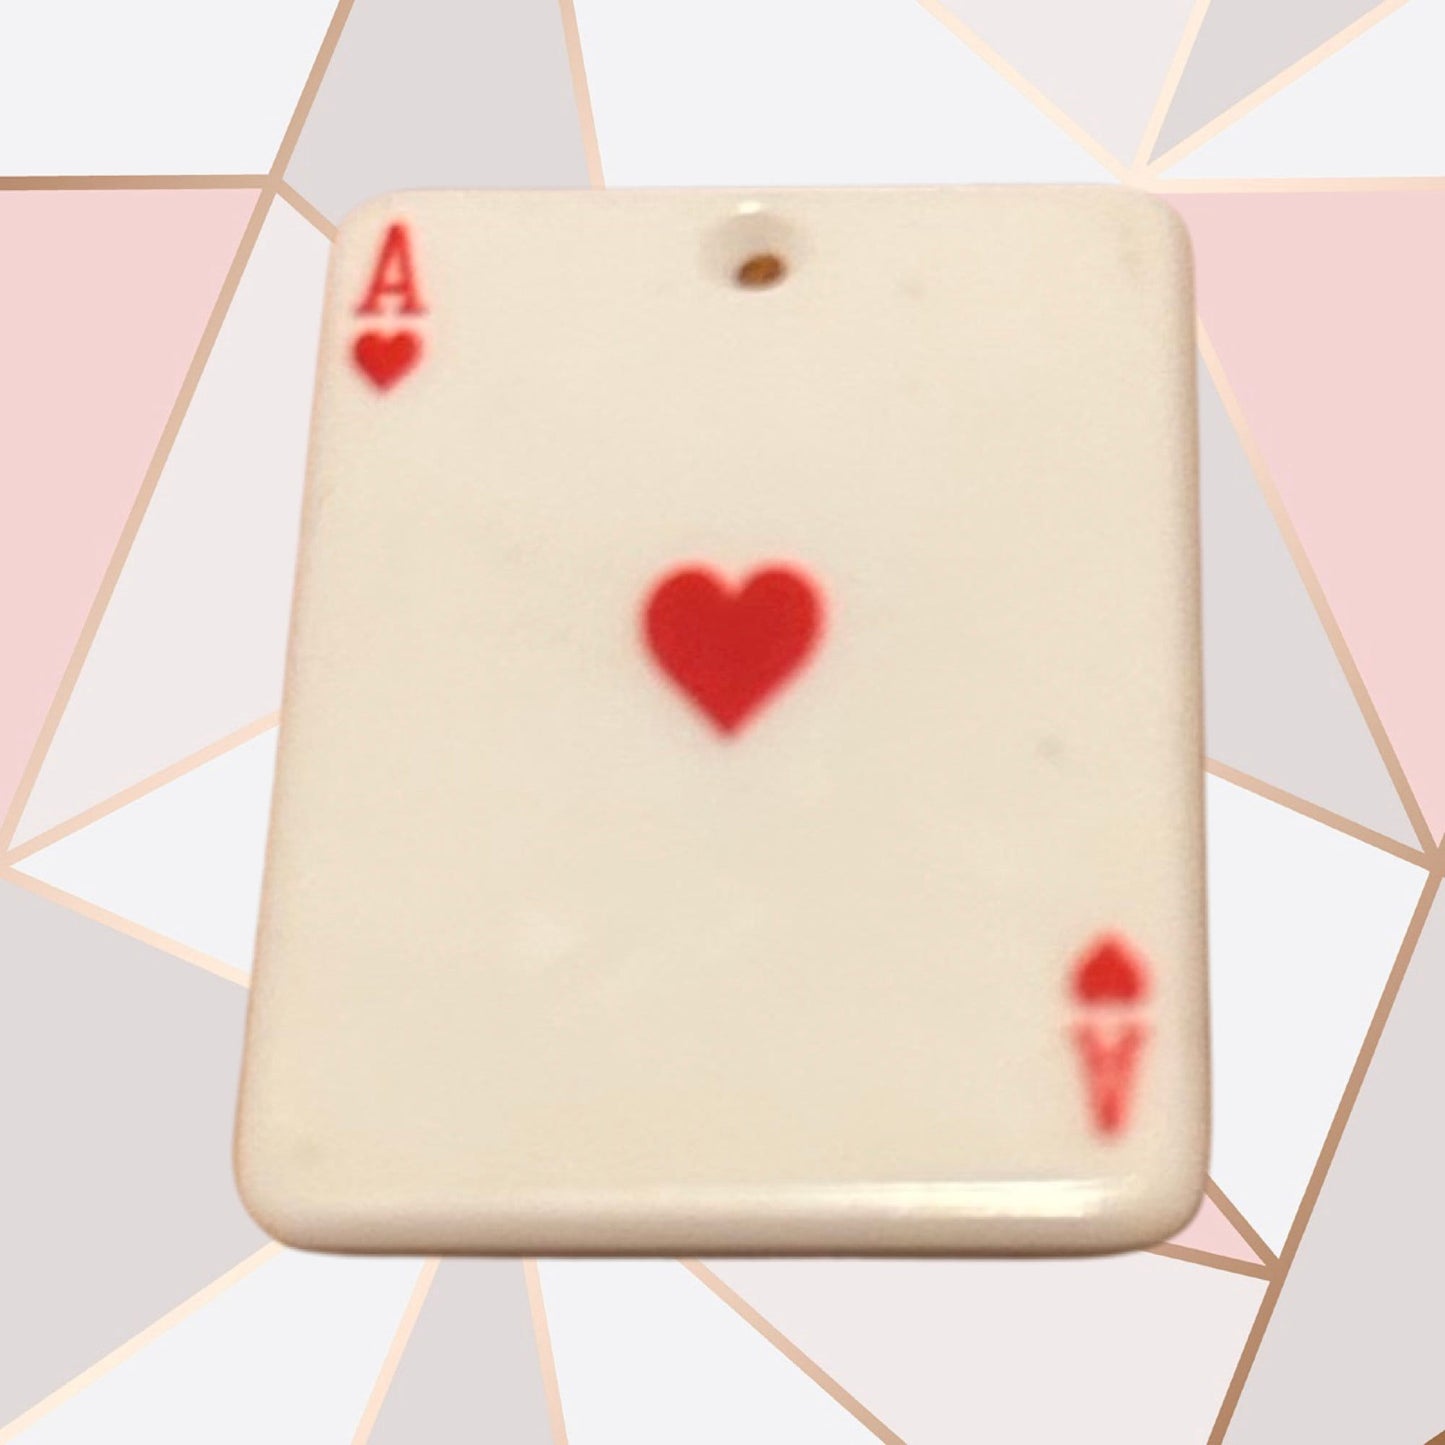 Card charms | Poker | Spades | Cards | go fish | Queen of hearts | Club | Joker | King | Ace | shoe Charms | resin |